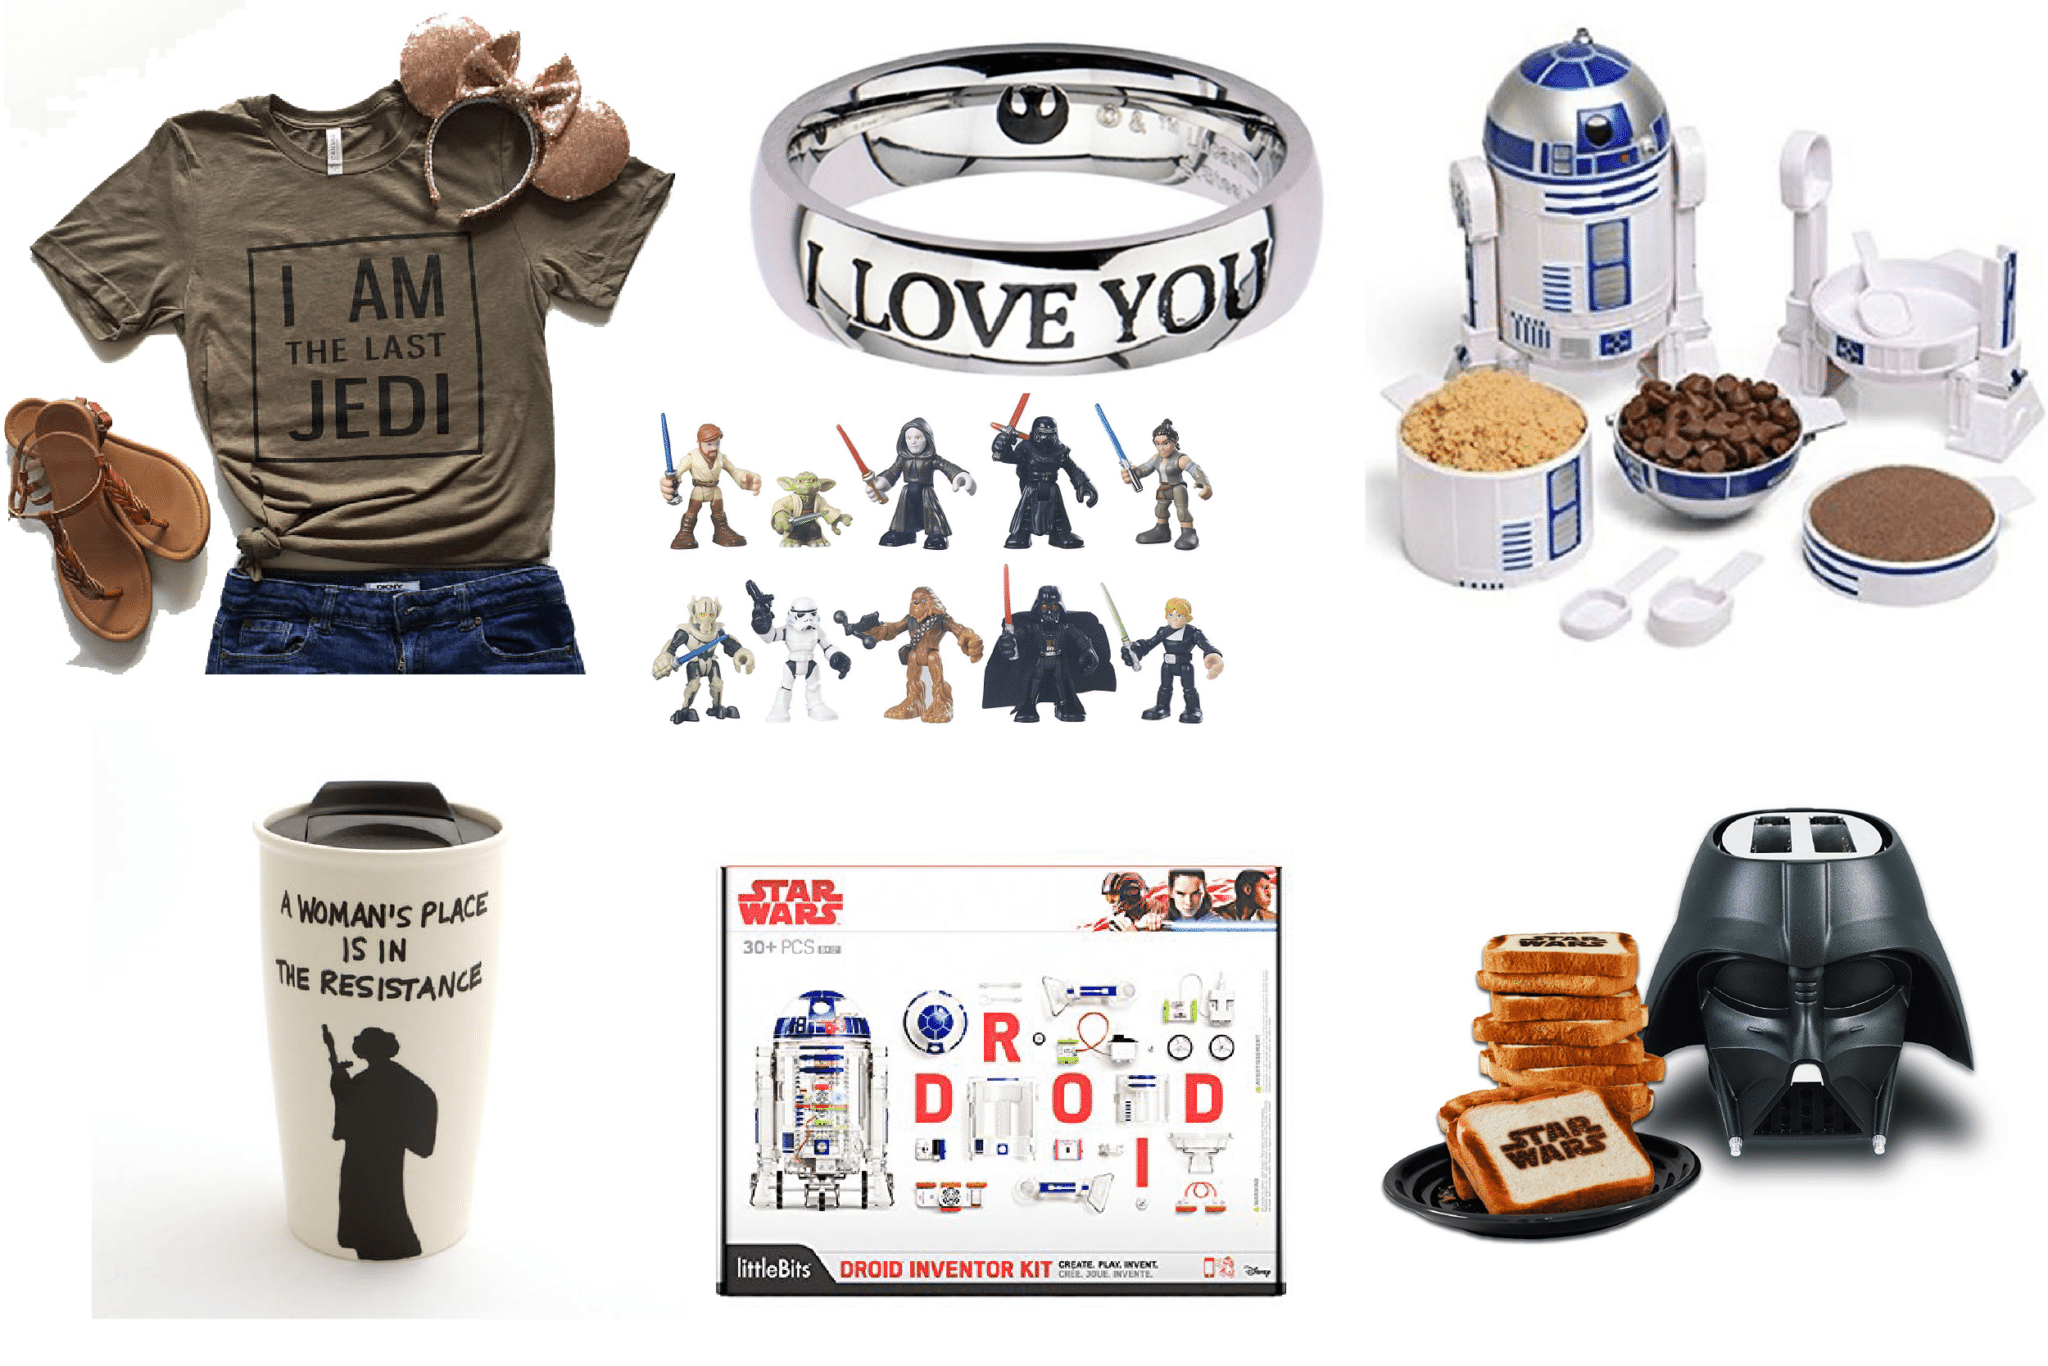 https://www.playpartyplan.com/wp-content/uploads/2017/11/star-wars-gifts-featured-01.png